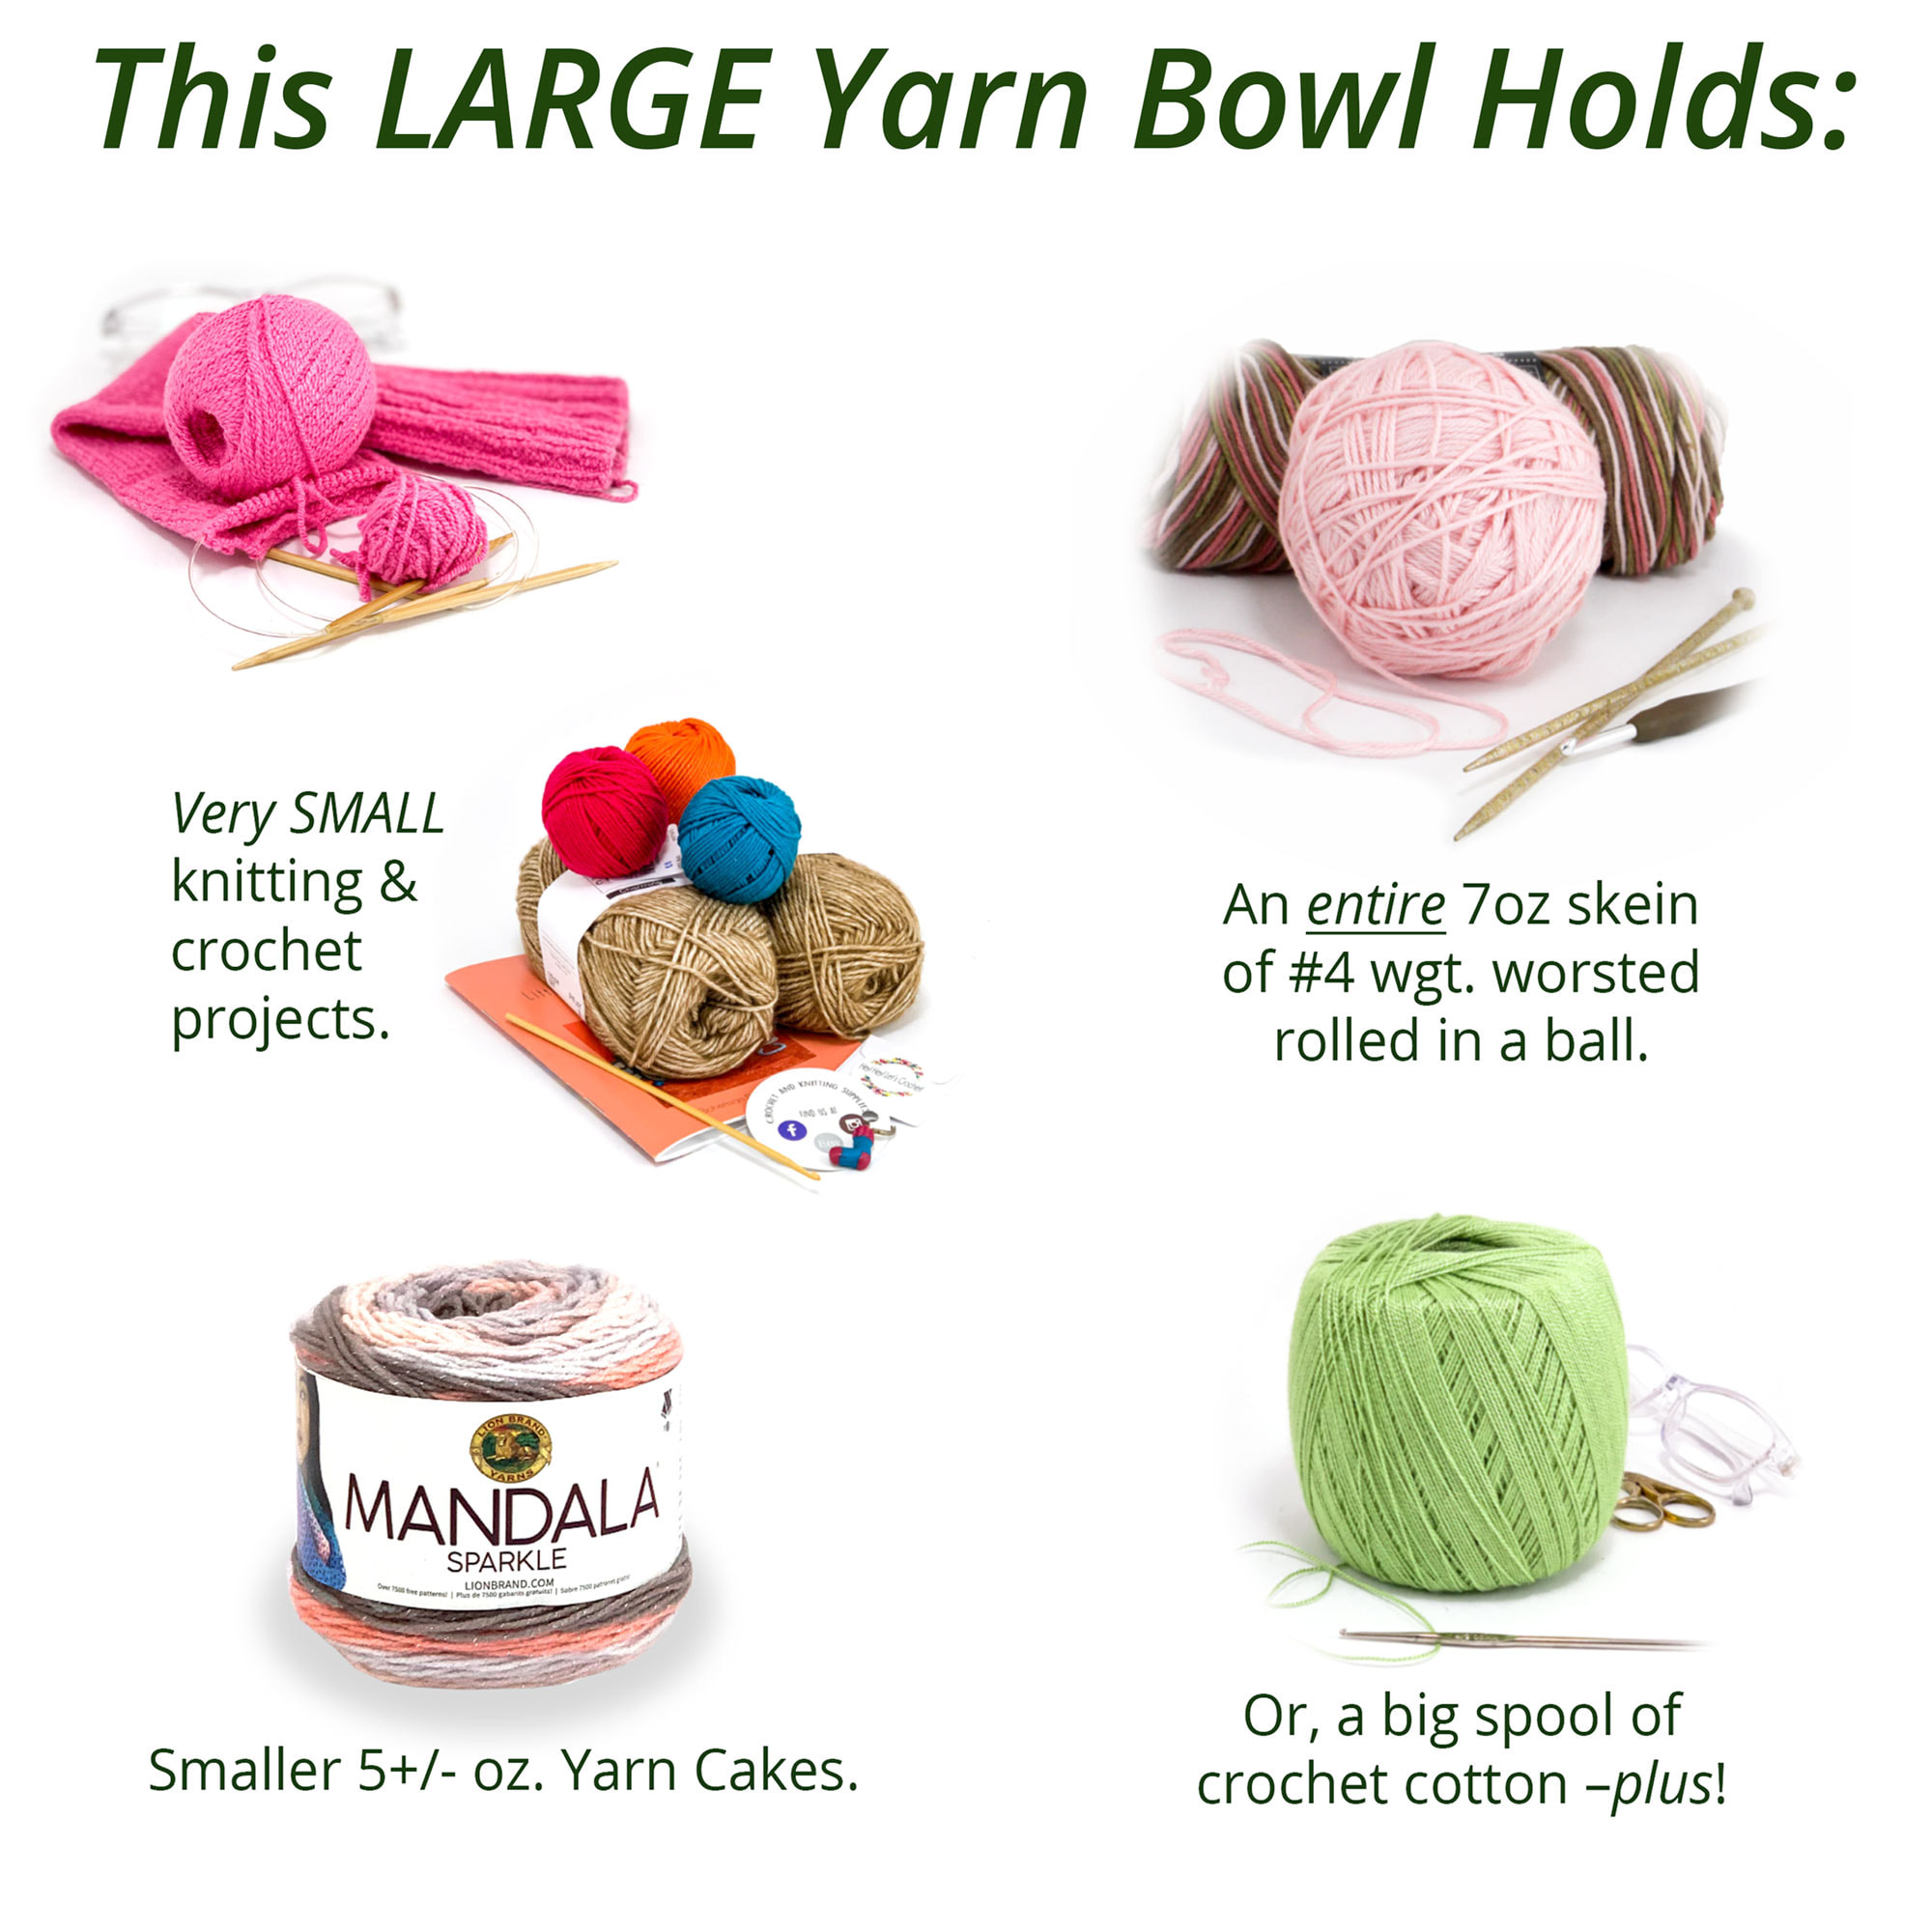 Does Your Large Yarn Bowl REALLY WORK?